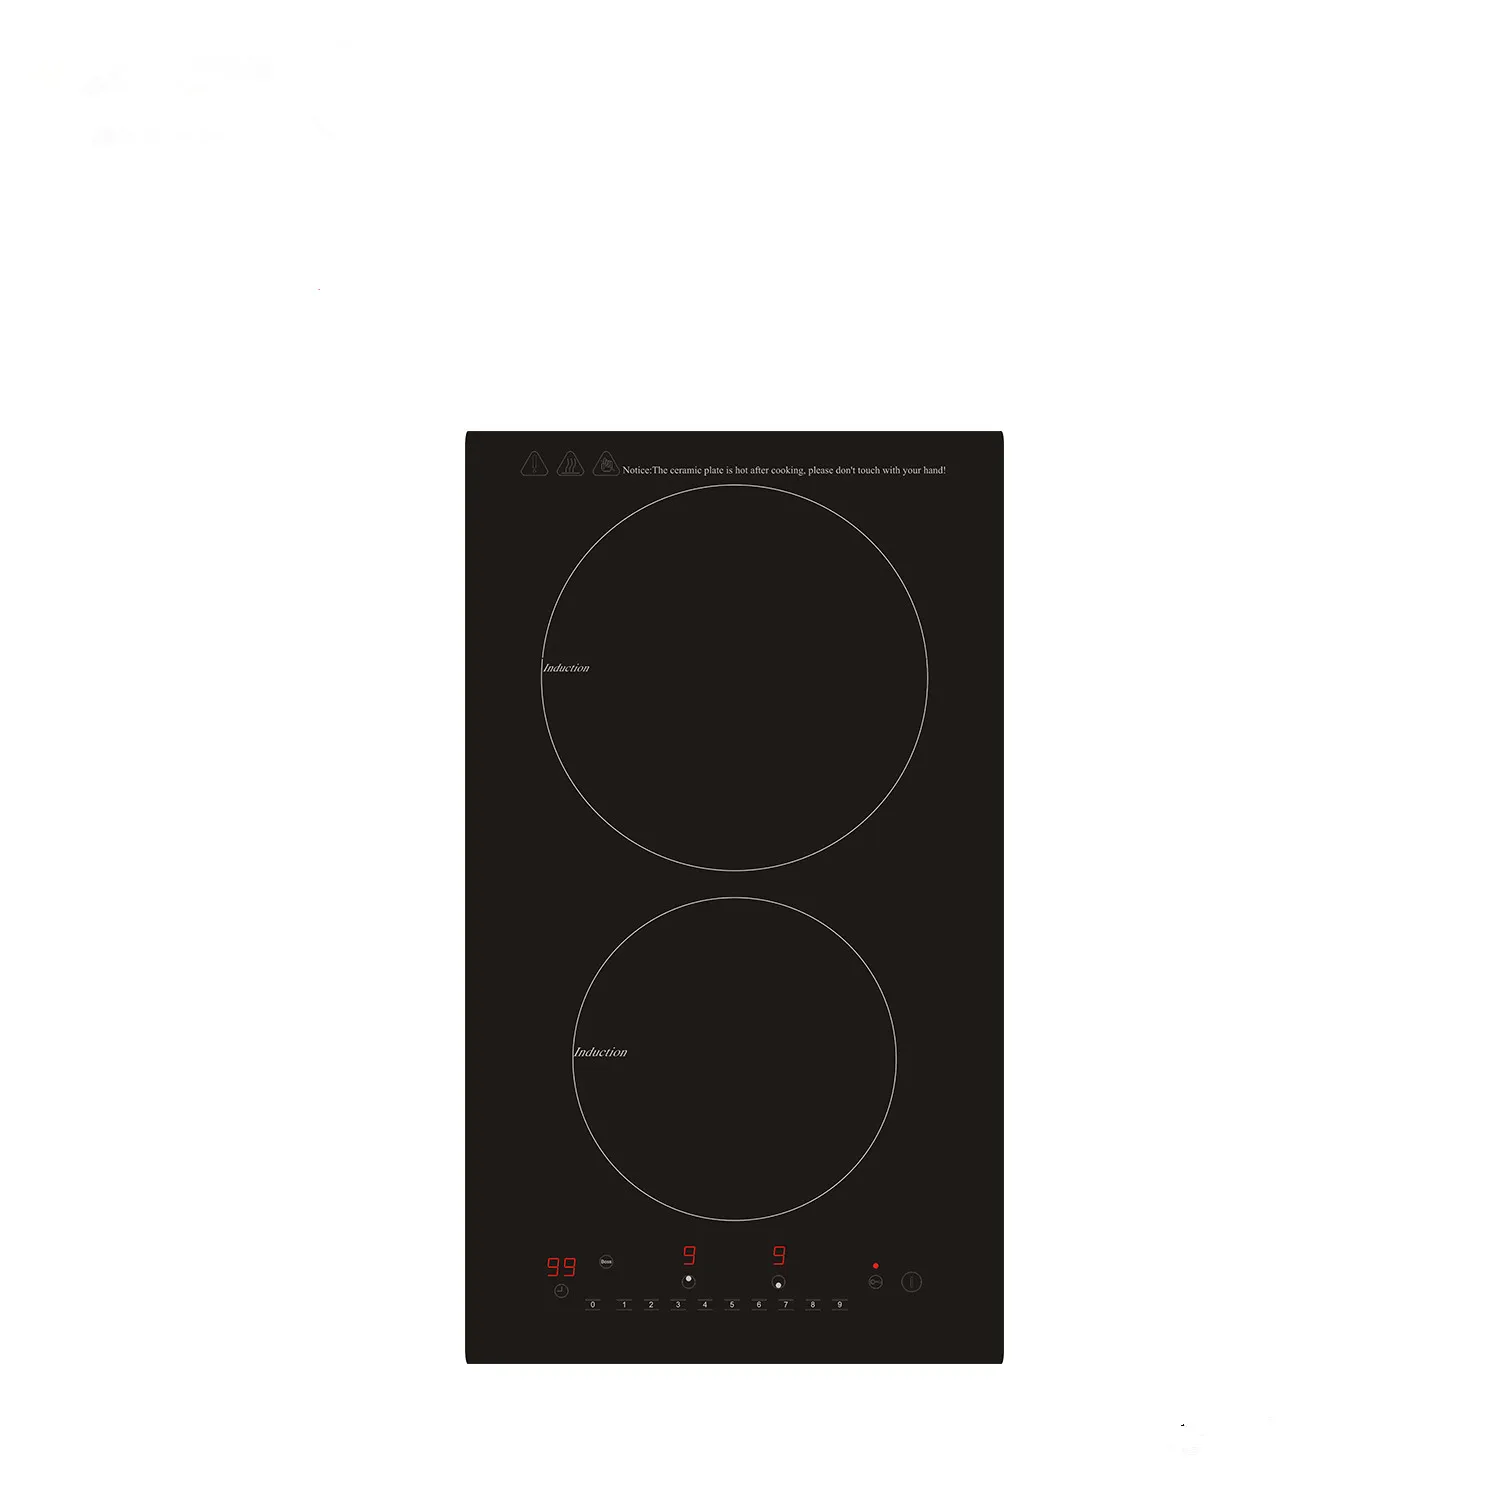 50cm induction cooker